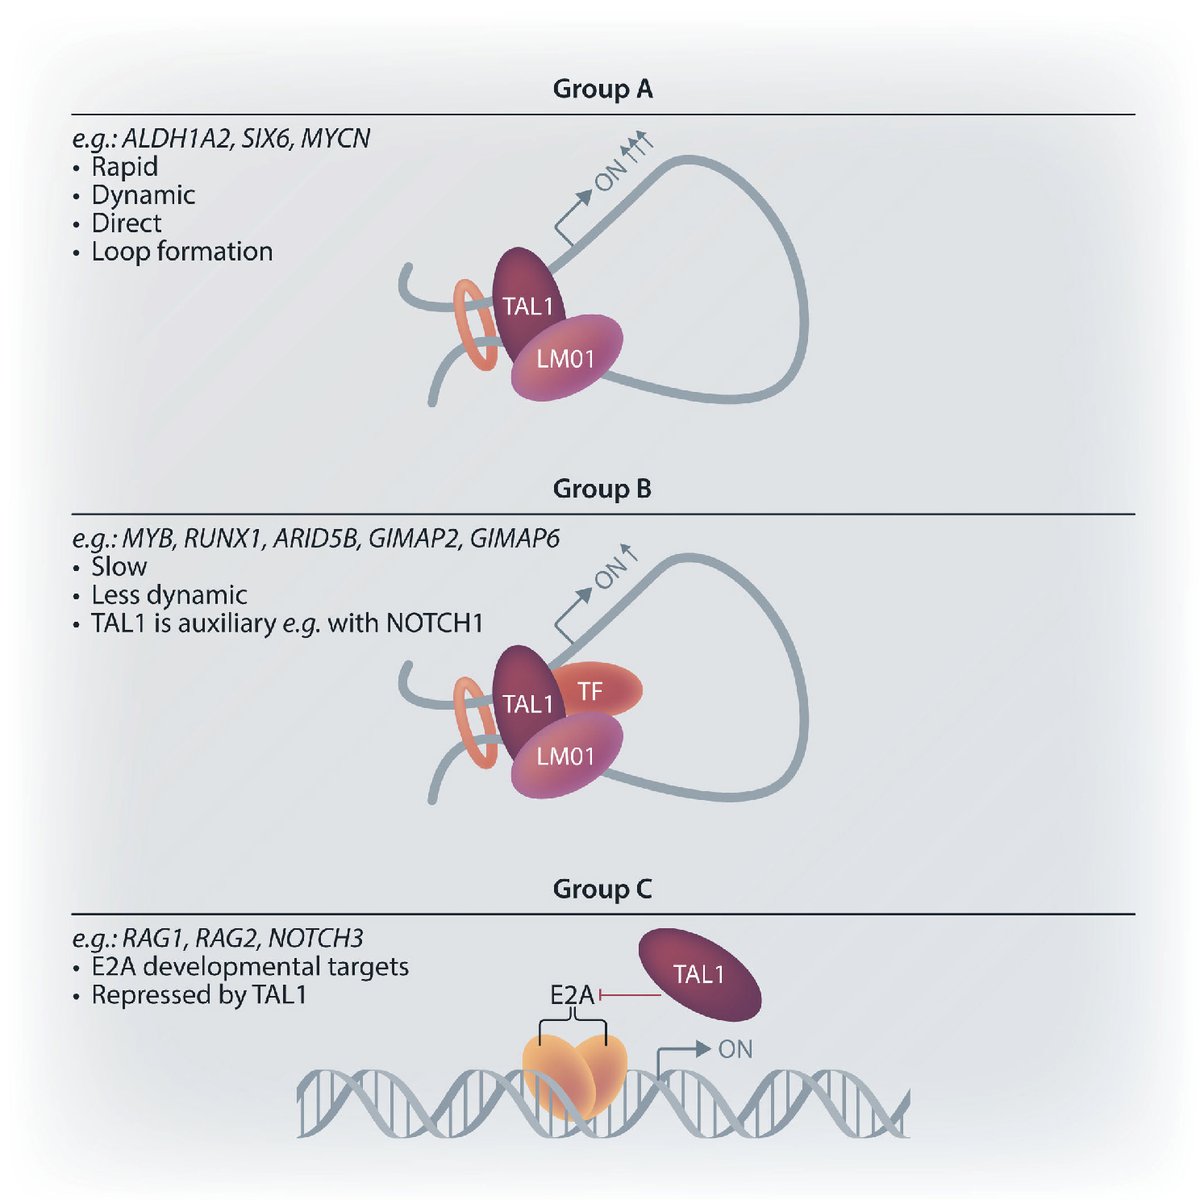 How do the regulatory mechanisms of TAL1 in T-cell acute lymphoblastic leukemia (T-ALL) cells work? A new study provides a comprehensive view of the TAL1-induced transcriptional program in human T-ALL cells. haematologica.org/article/view/h…